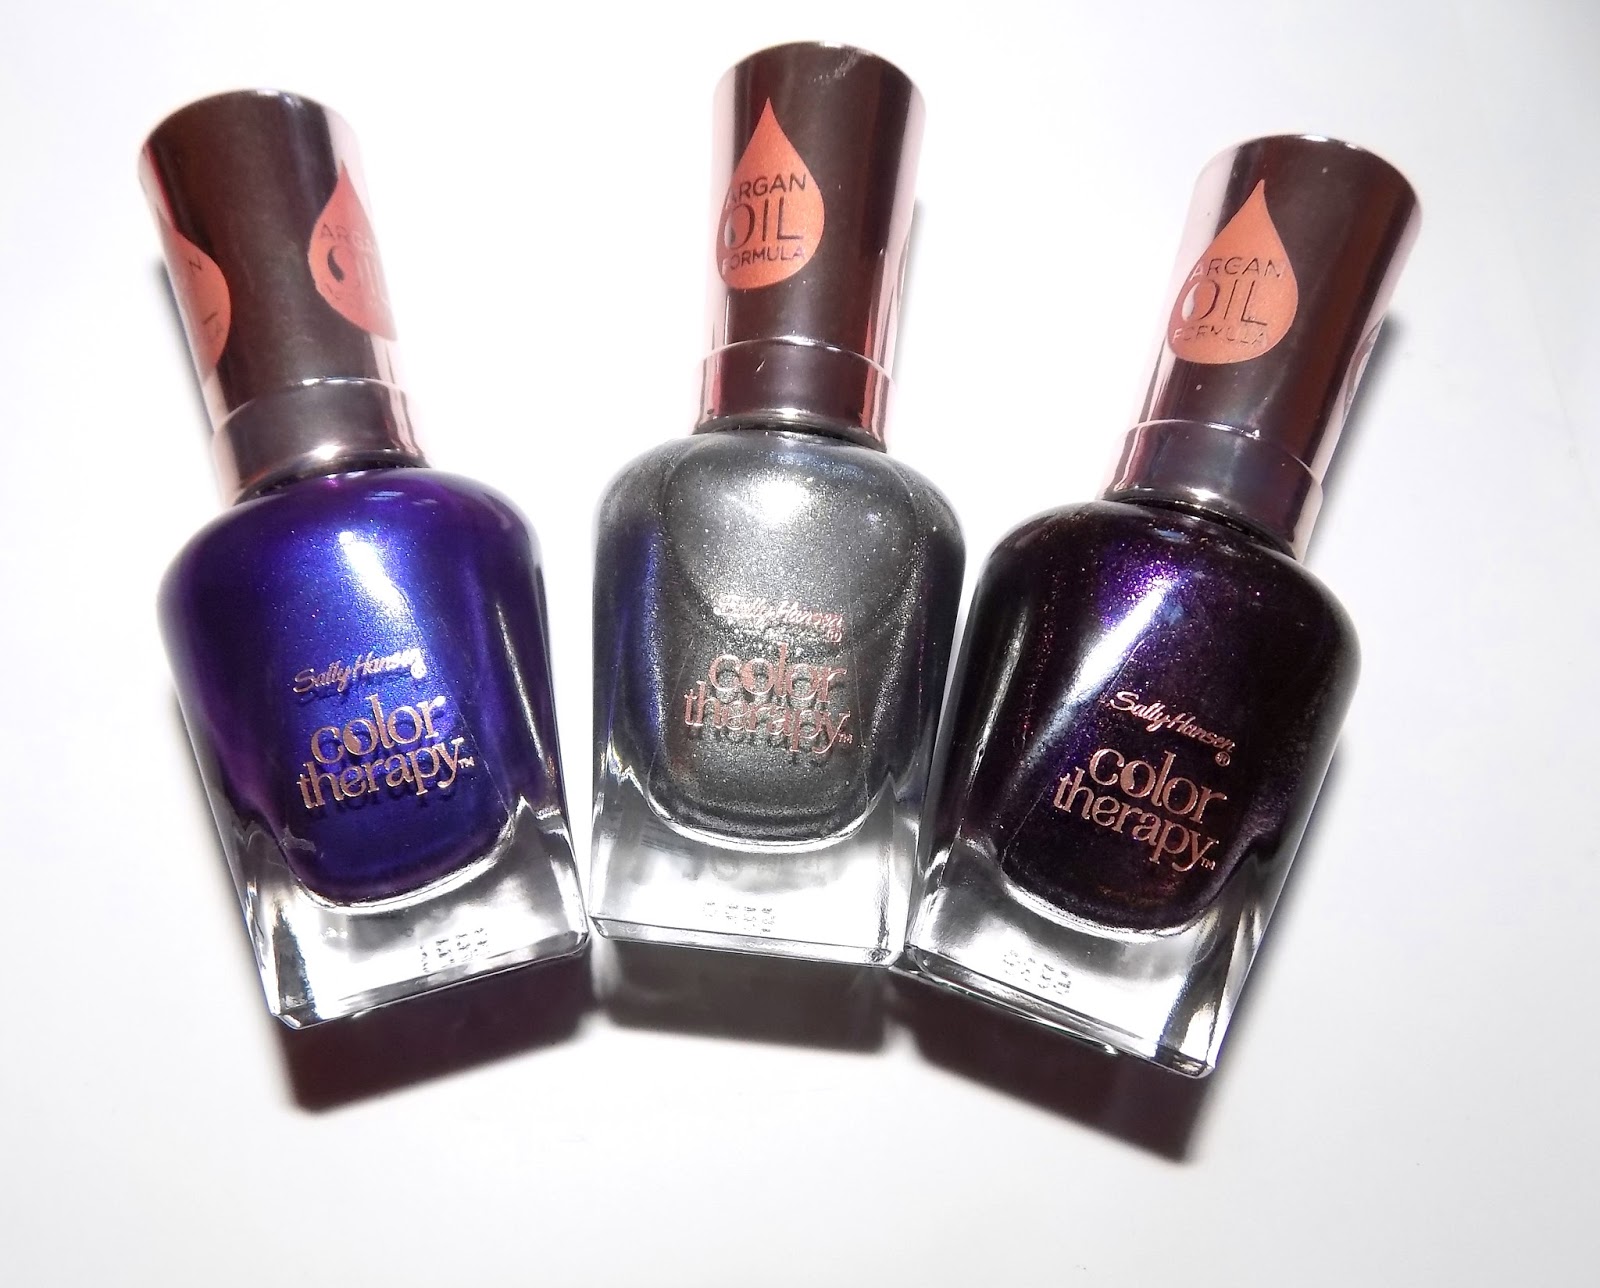 3. Sally Hansen Color Therapy Nail Polish Swatch Book - wide 10